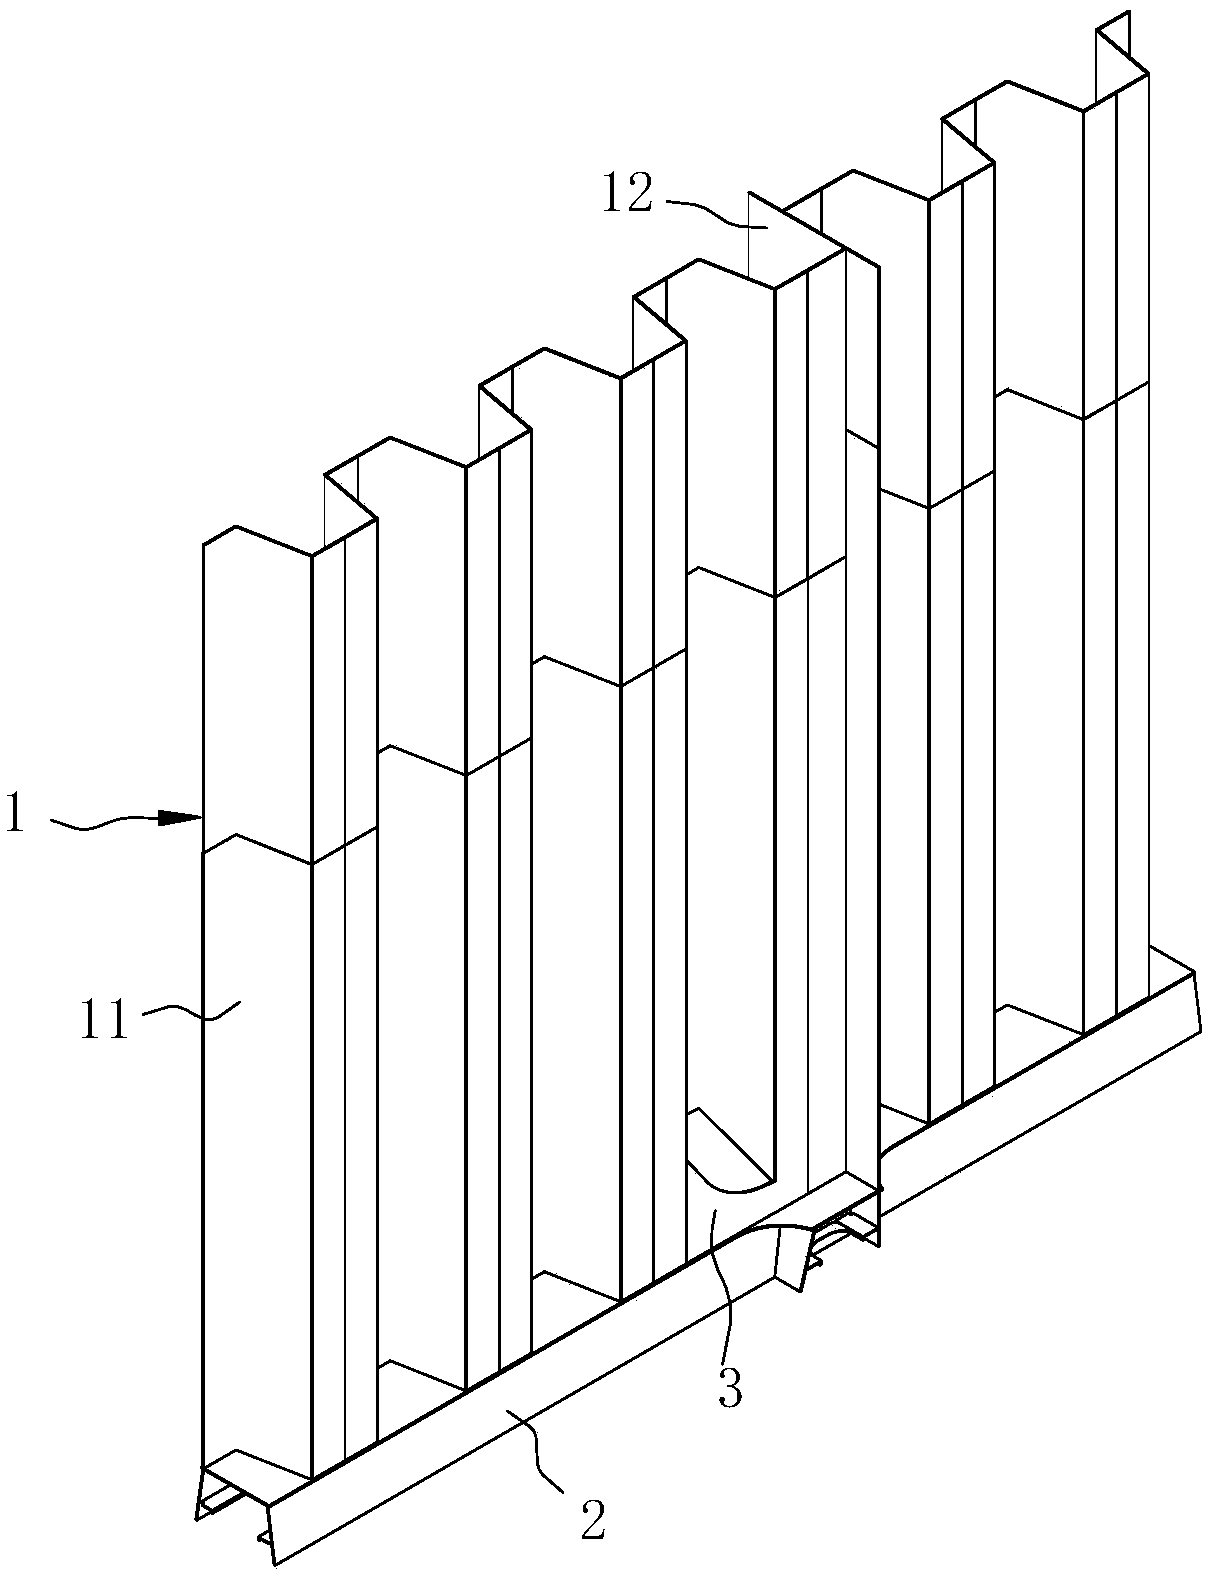 Segmented construction method for troughed bulkhead